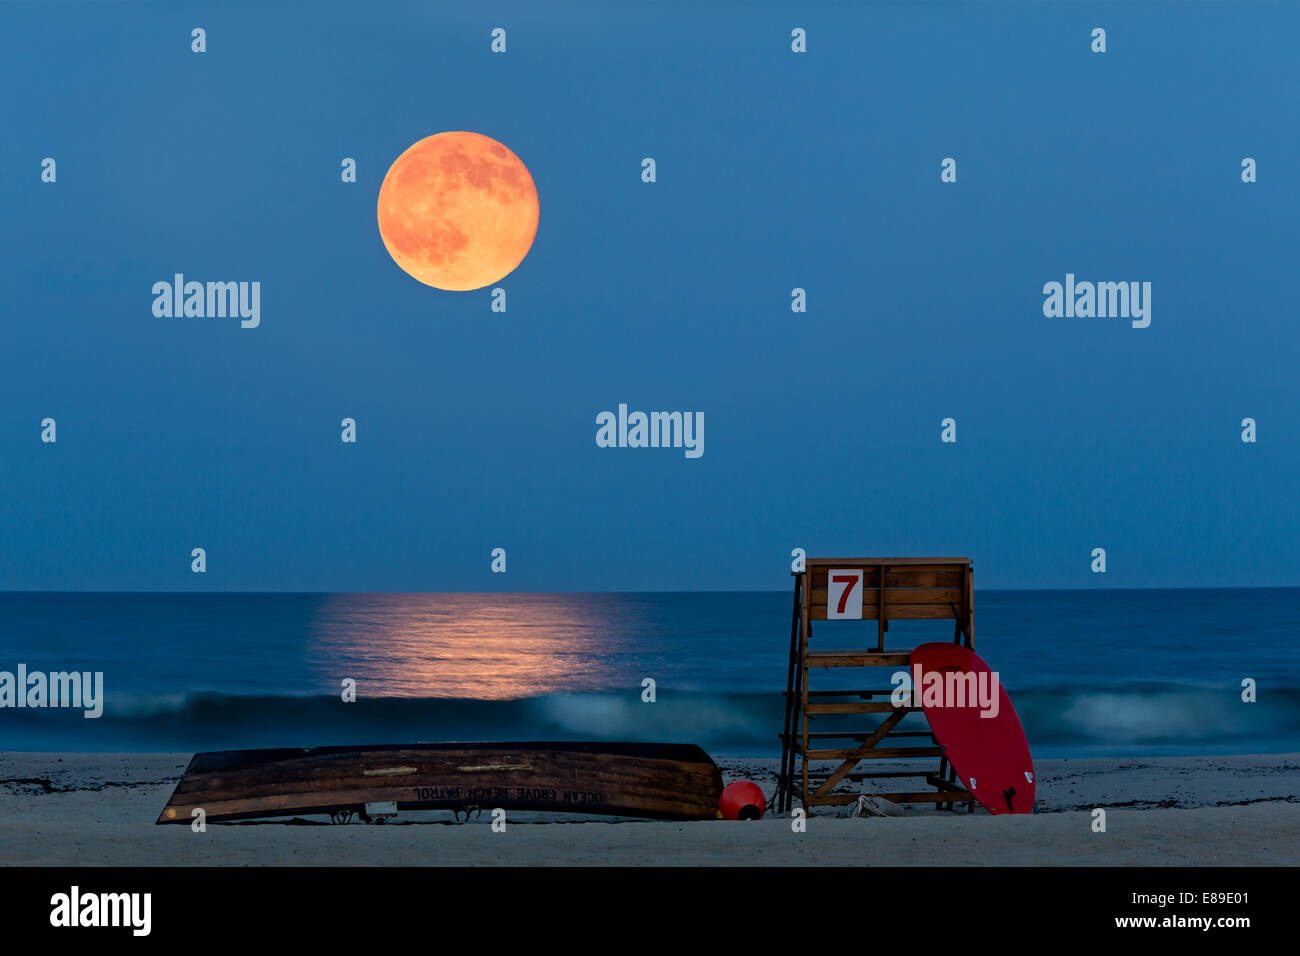 Super moon rising during twilight over Asbury Park Beach, New Jersey, with life guard stand, Ocean Grove Beach Patrol canoe and surf board as the foreground. Stock Photo